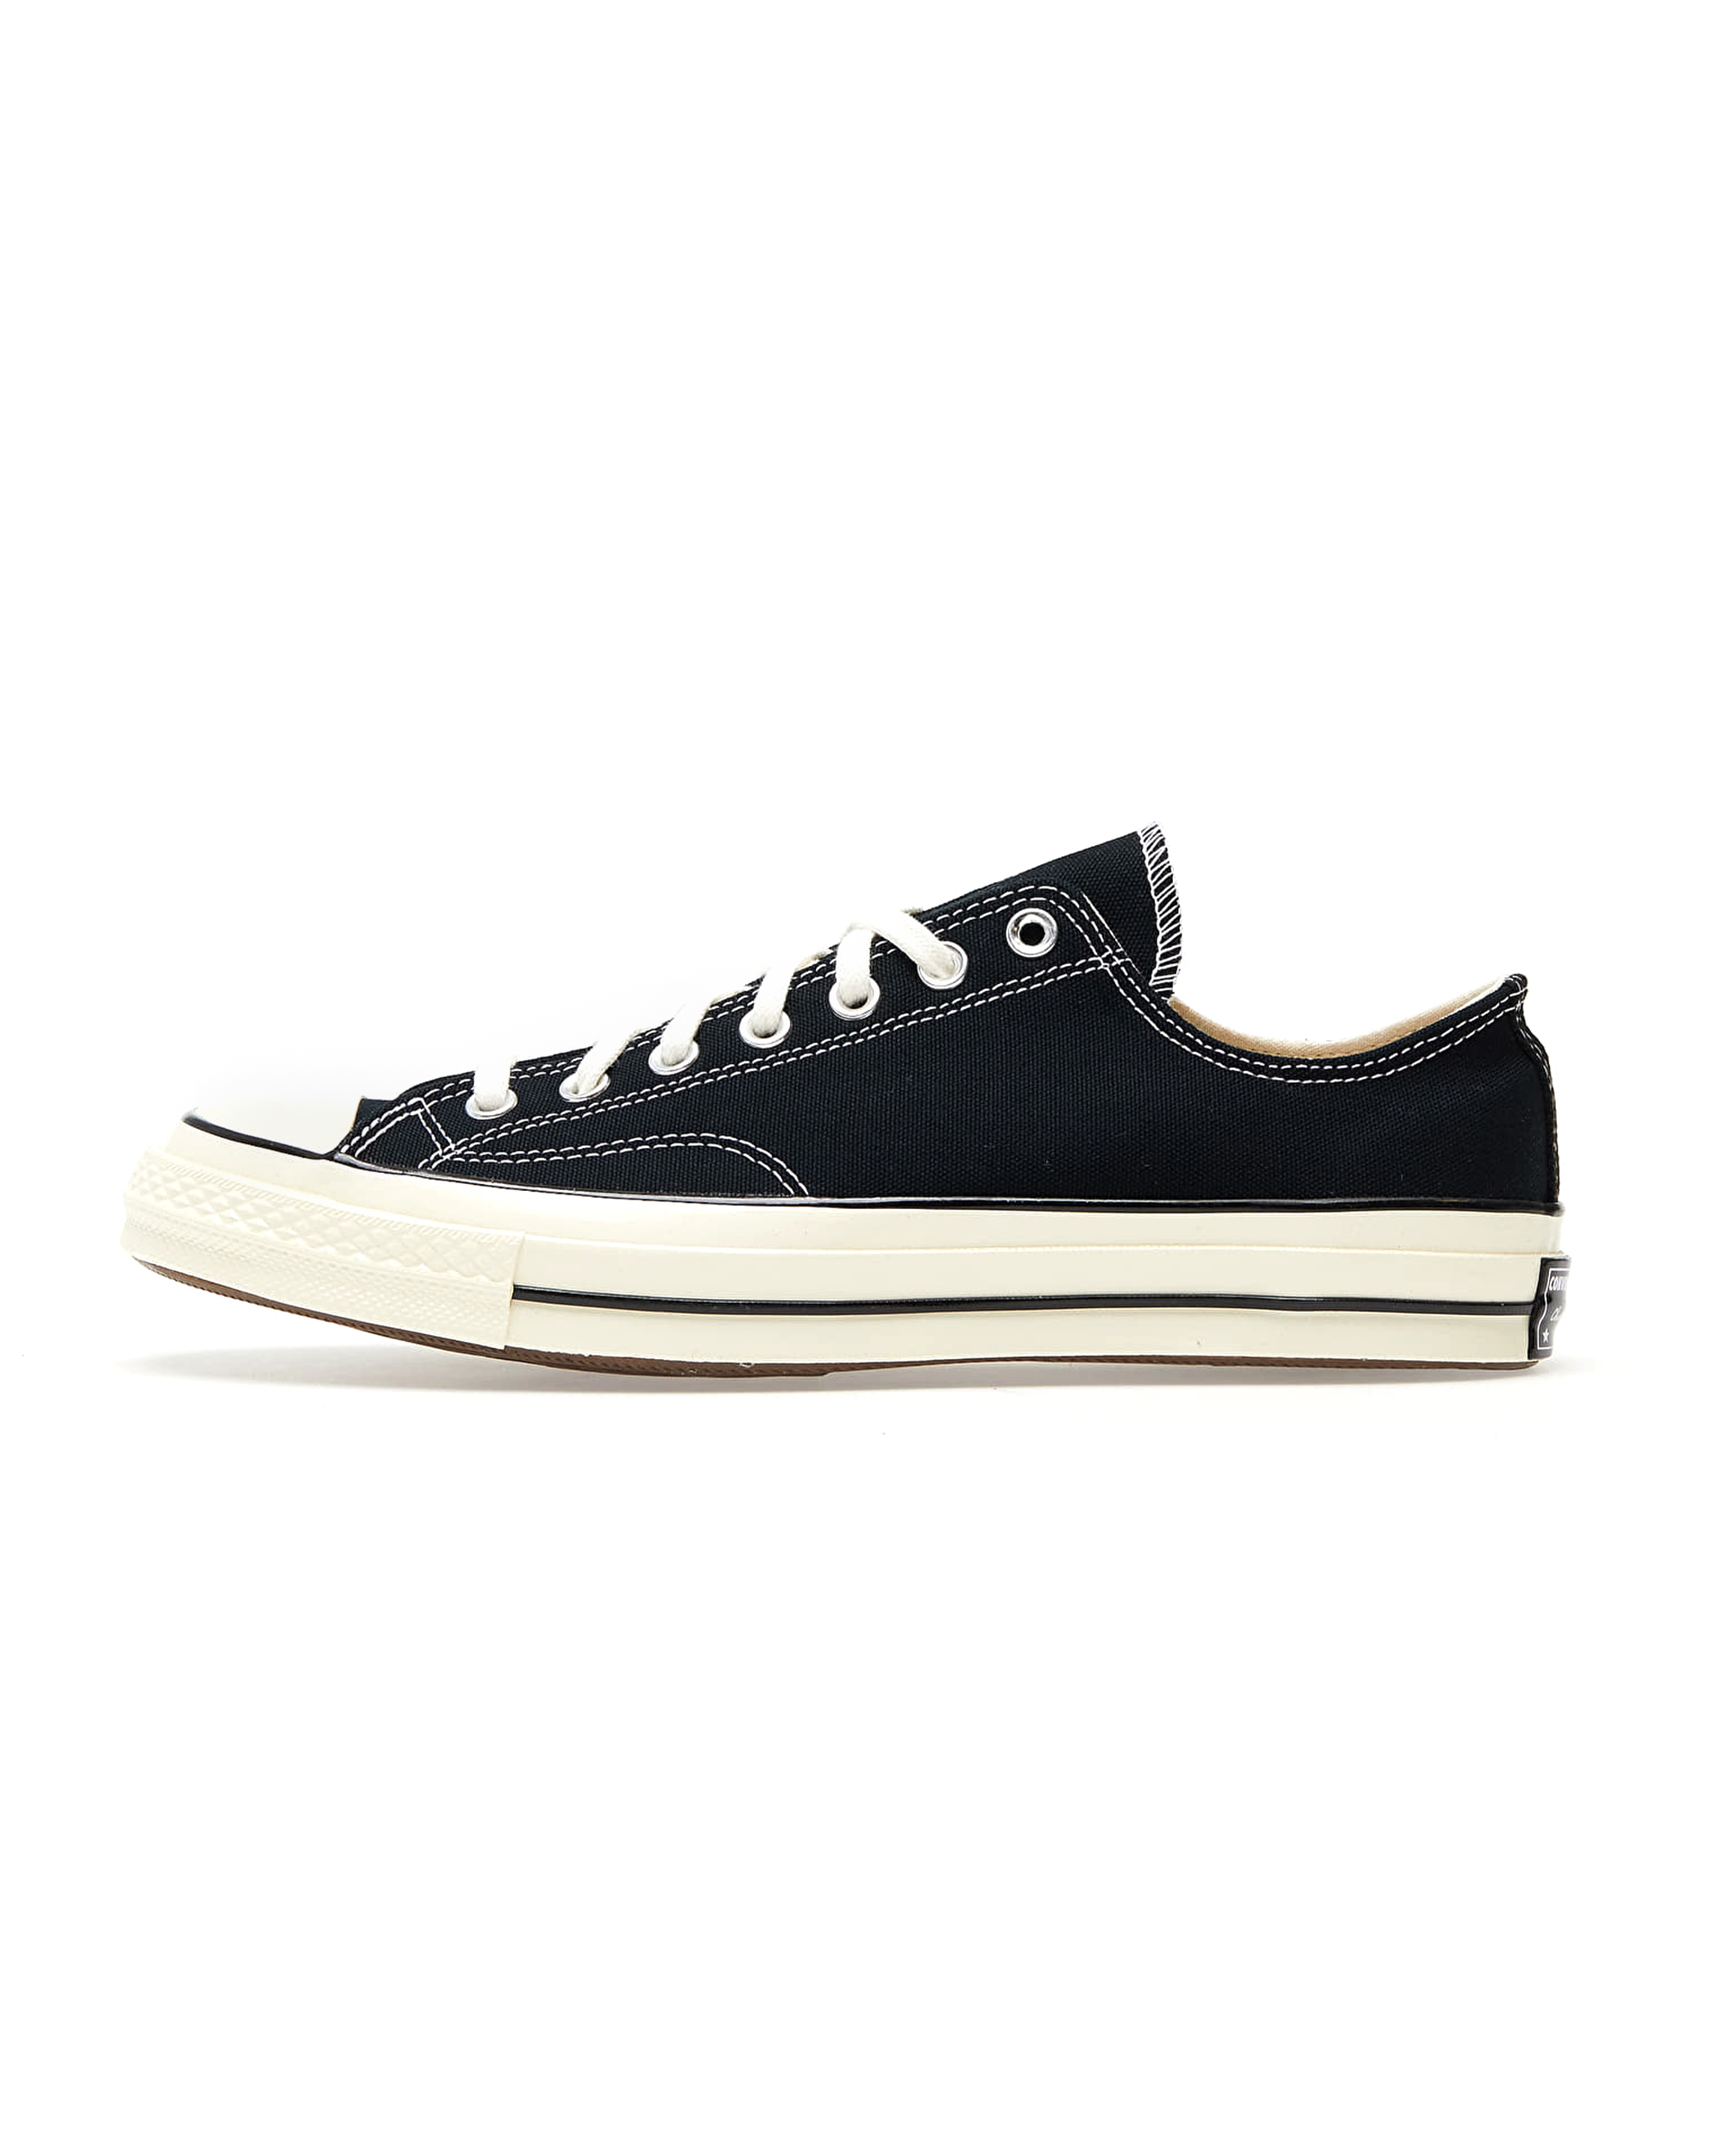 Chuck Taylor All Star CT 70 Black / Black / Egret – HIGHS AND LOWS